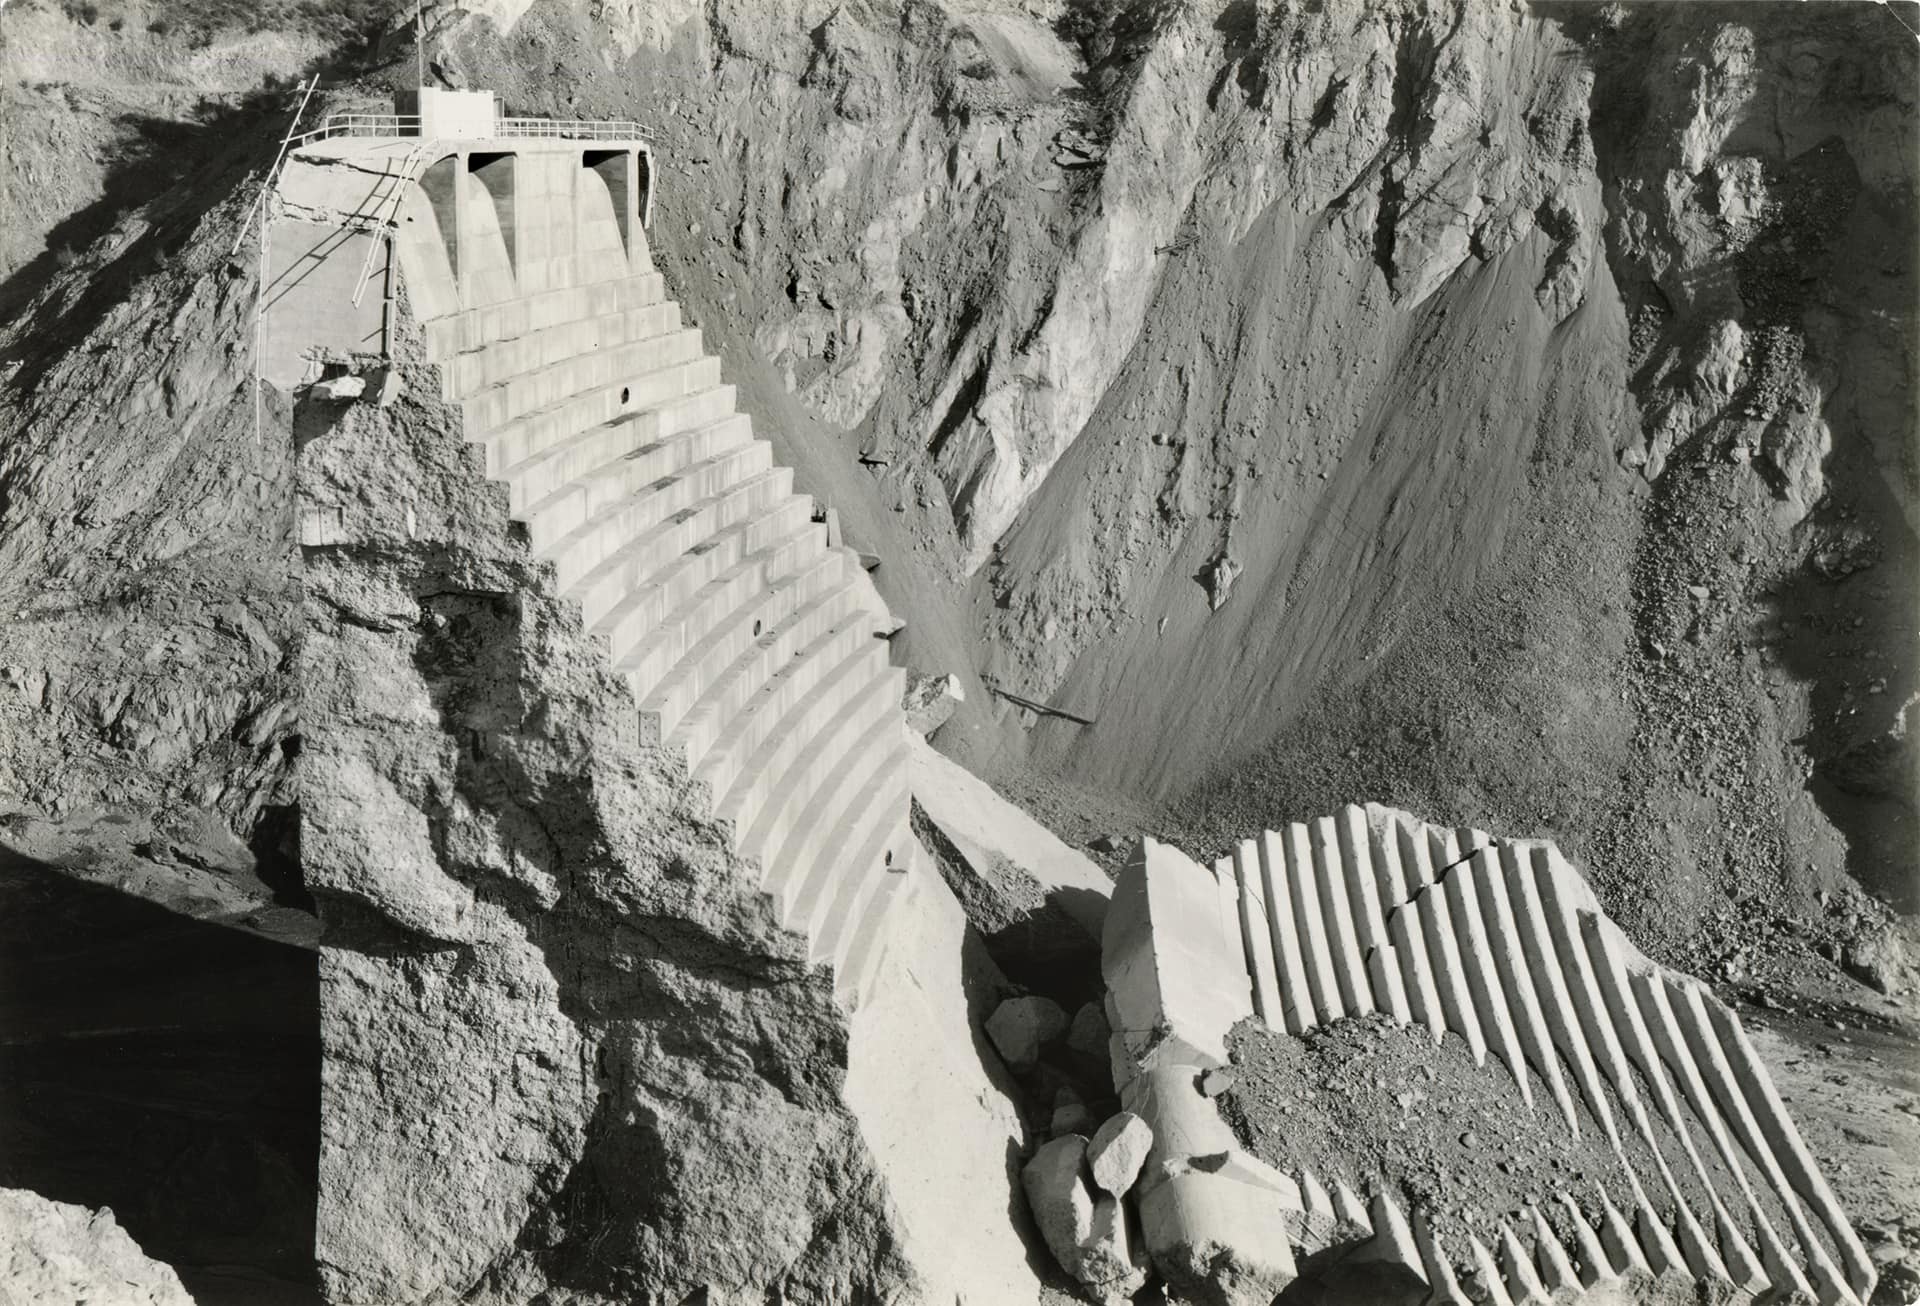 America's newest national monument honors the lesser-known history of the St. Francis Dam disaster - Roadtrippers